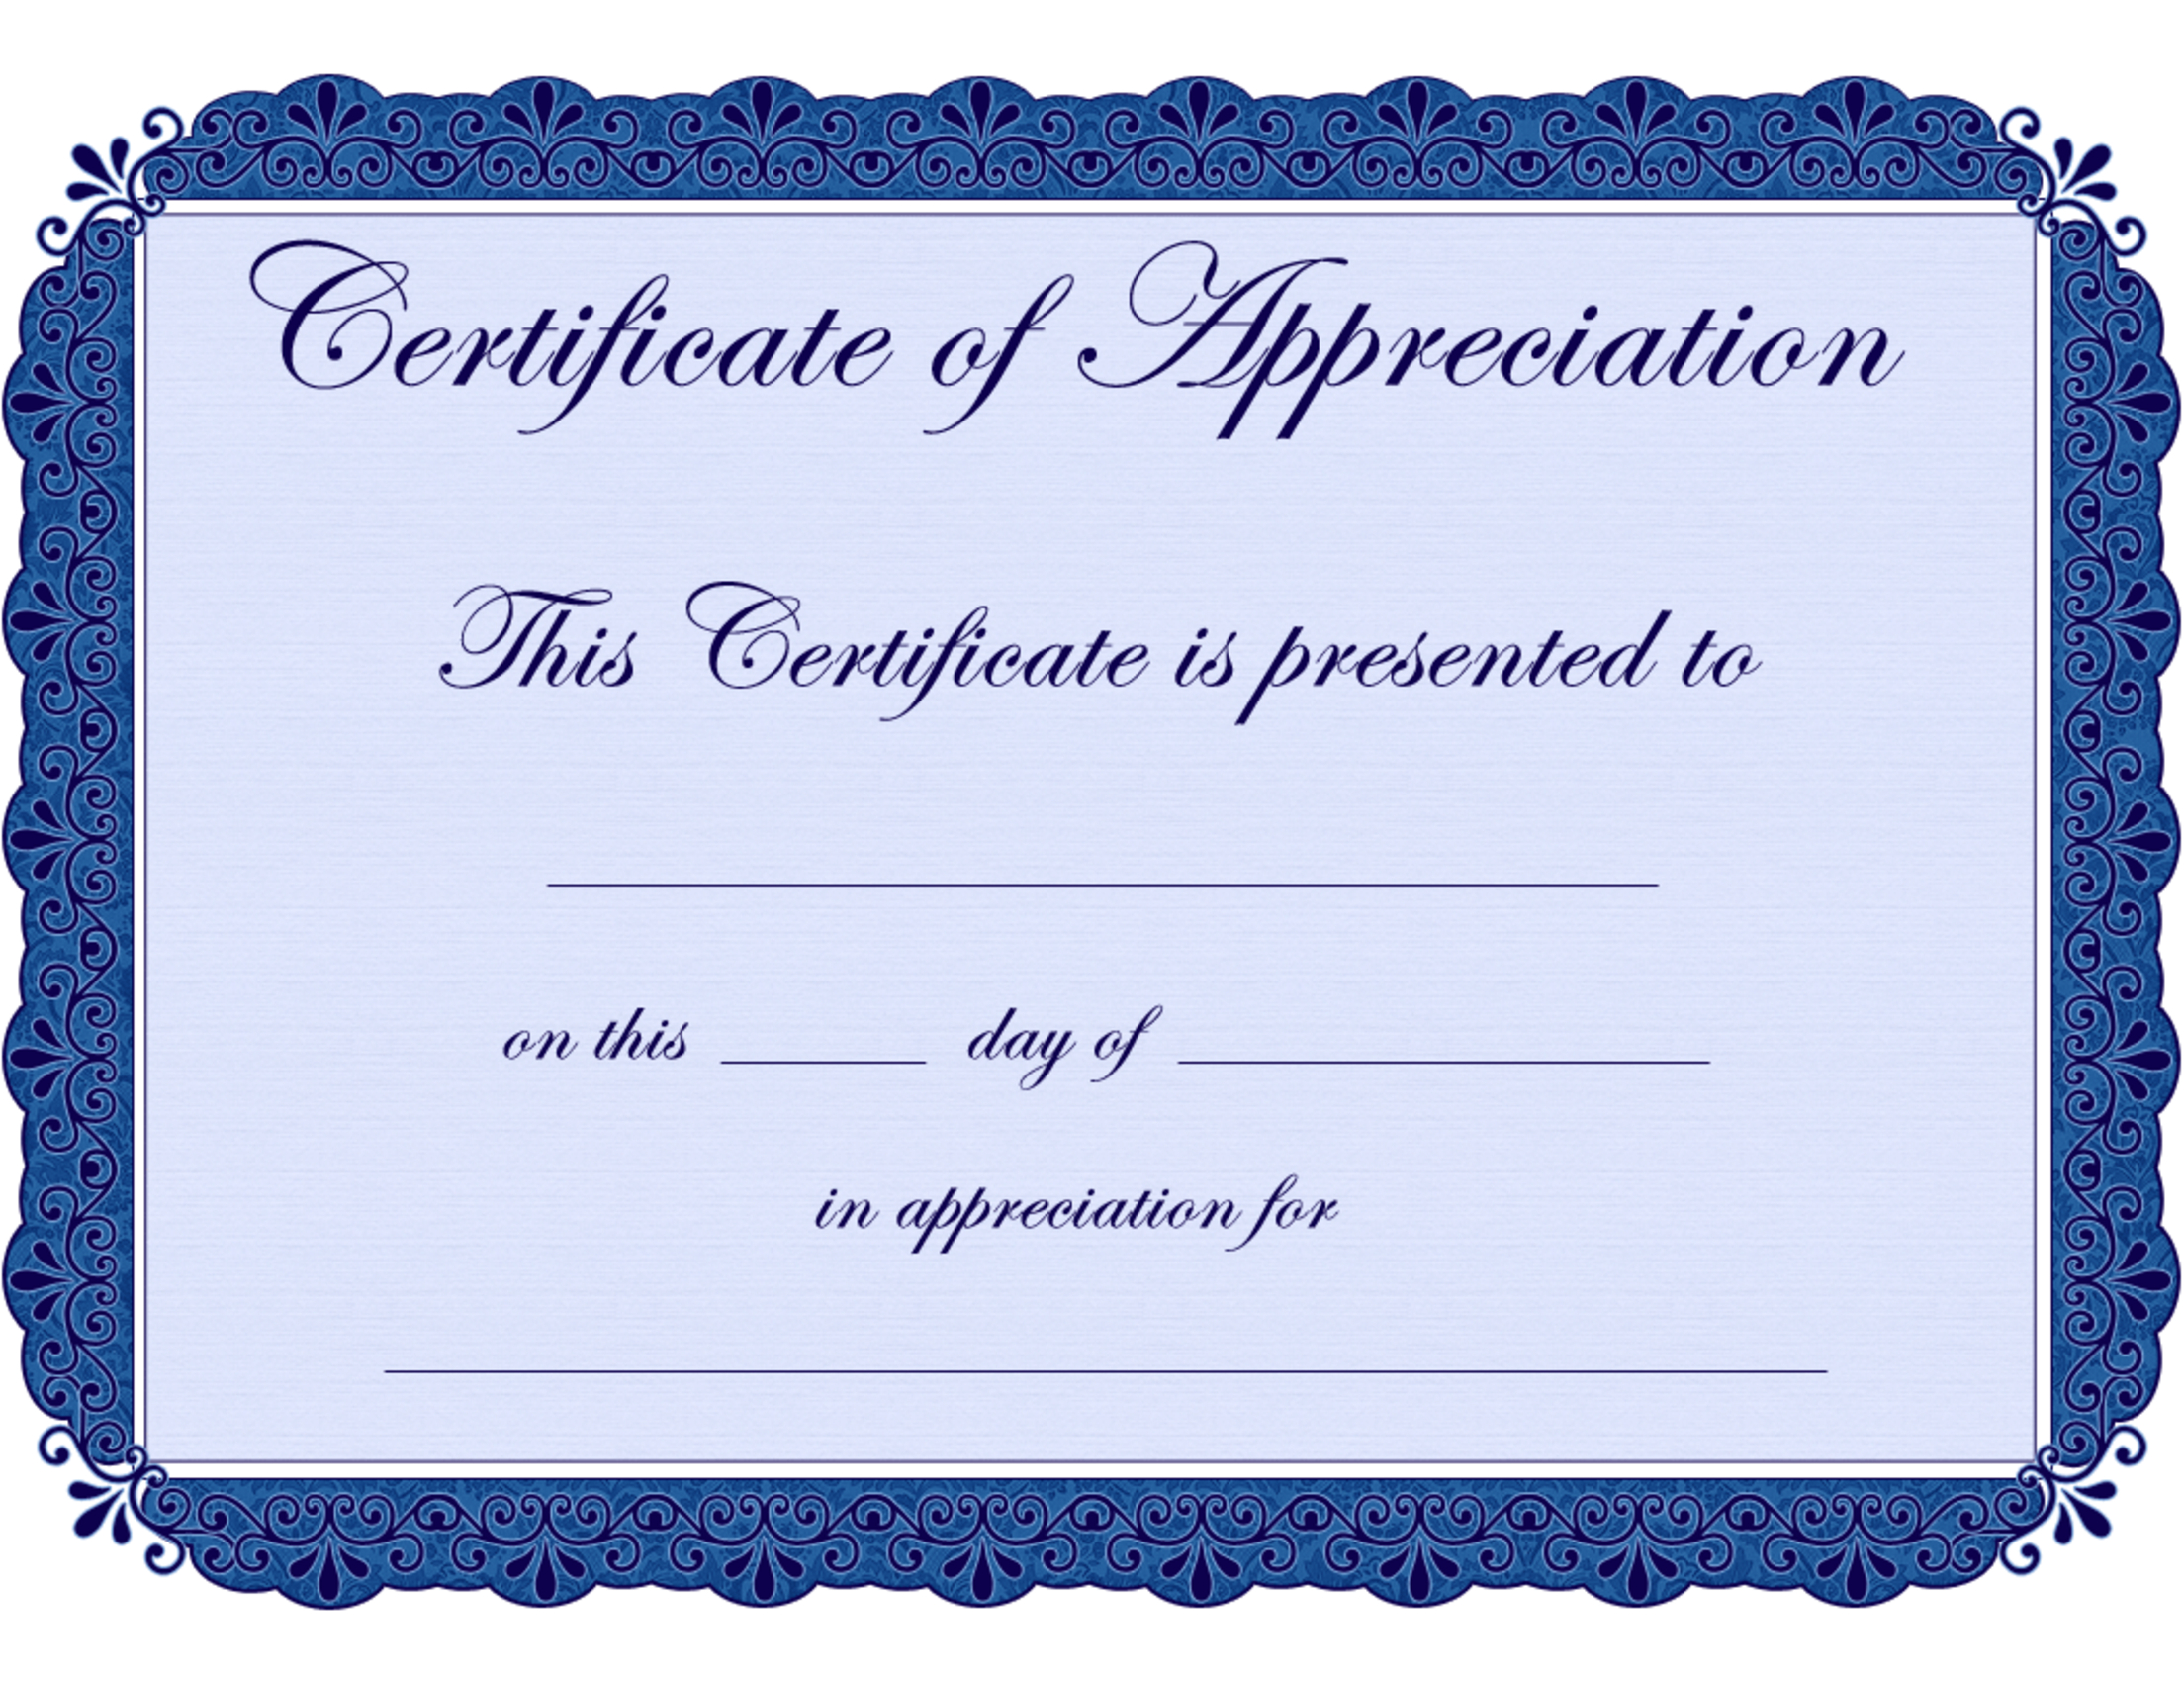 Free Printable Certificates Certificate Of Appreciation With Regard To Template For Certificate Of Appreciation In Microsoft Word